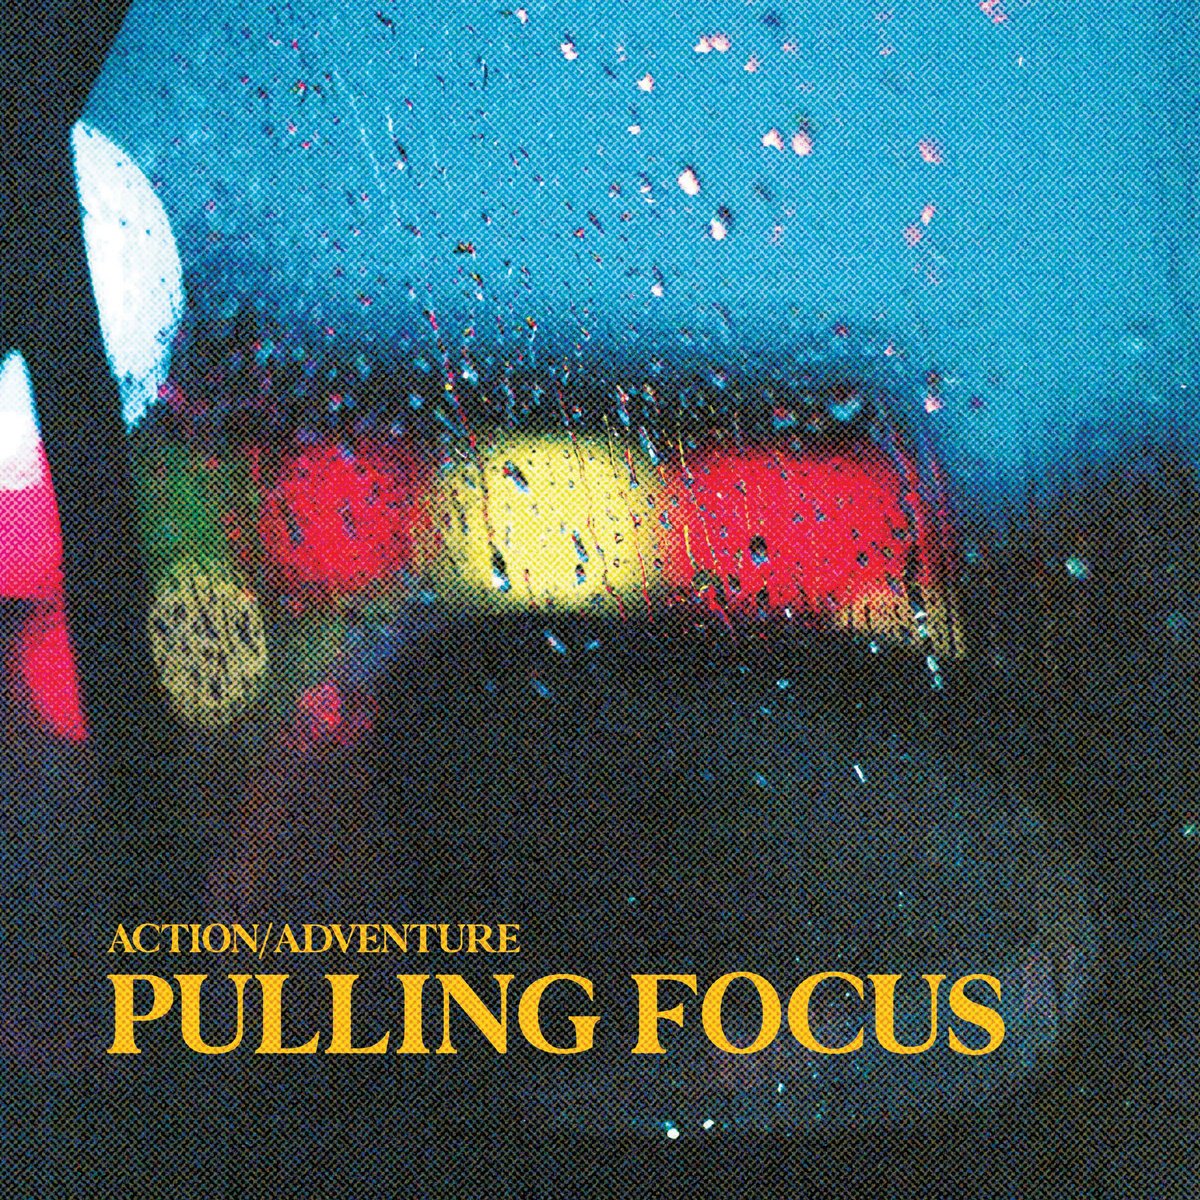 Action/Adventure - Pulling Focus (2021) FLAC Download